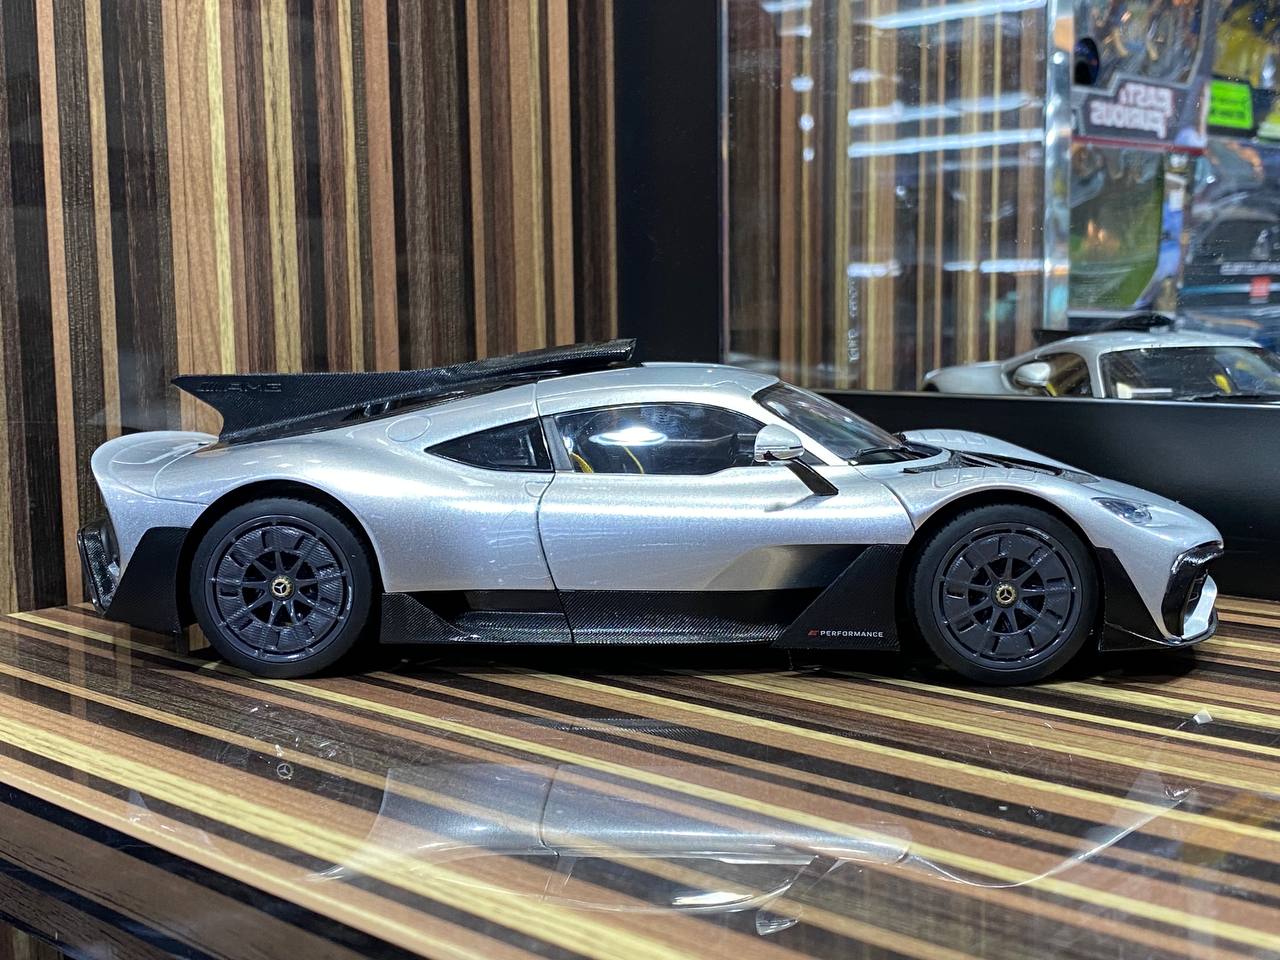 Mercedes Benz Amg One Dealer Edition Silver by Mini Champs|Sold in Dturman.com Dubai UAE.